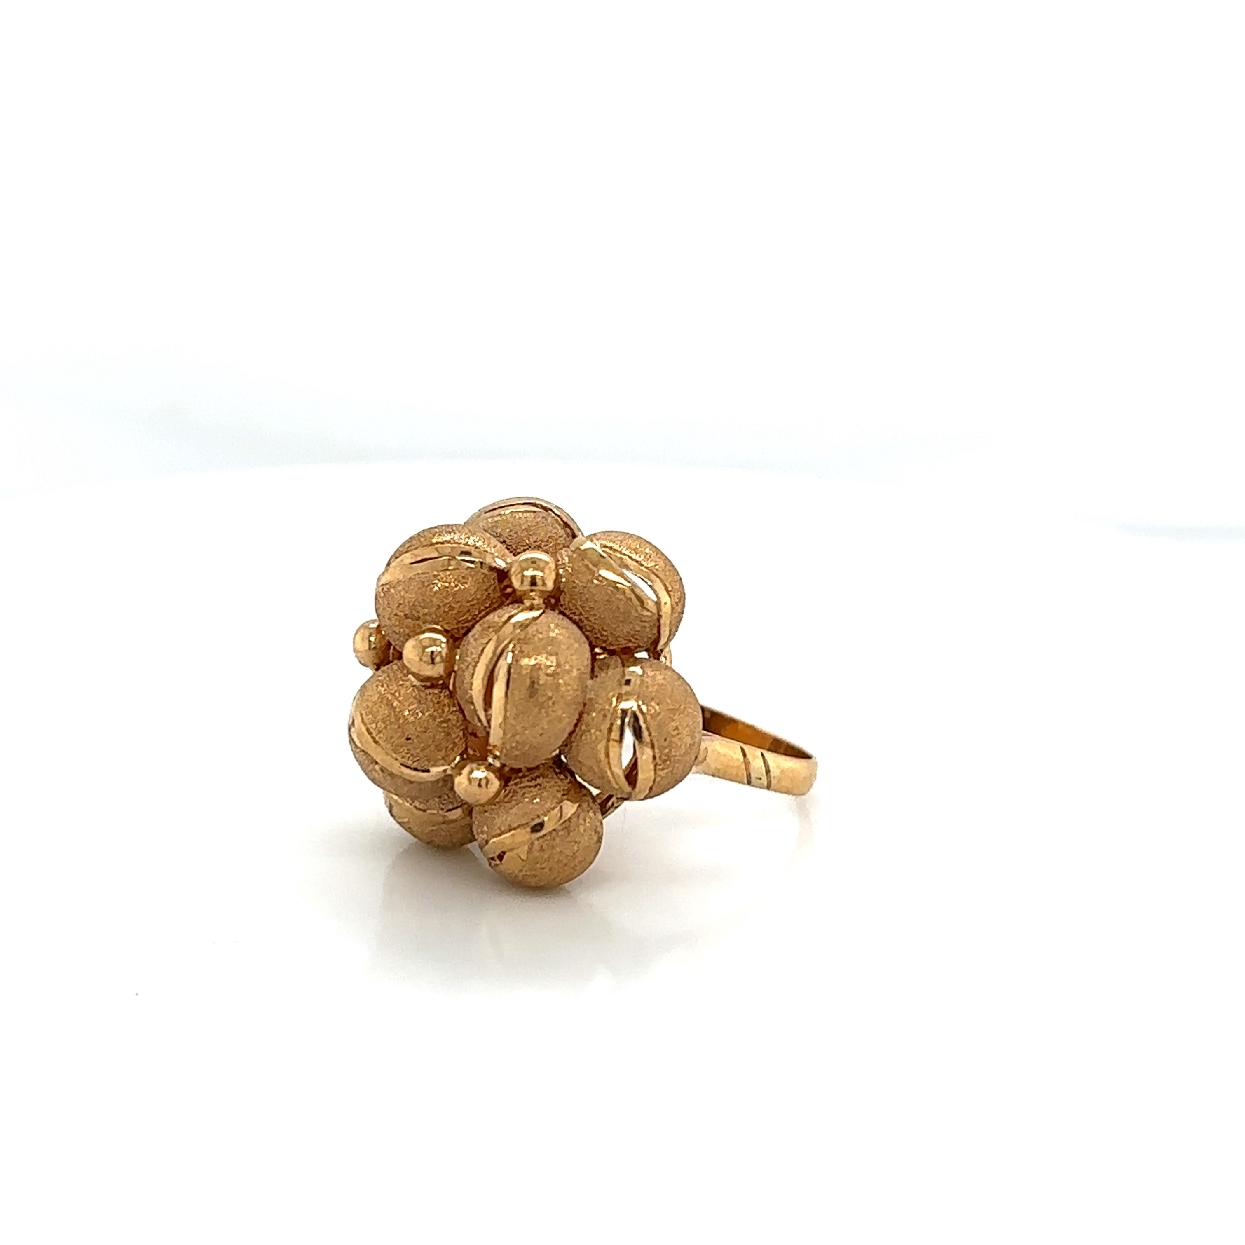 14K Yellow Gold Ball Cluster Ring

Size 6.5